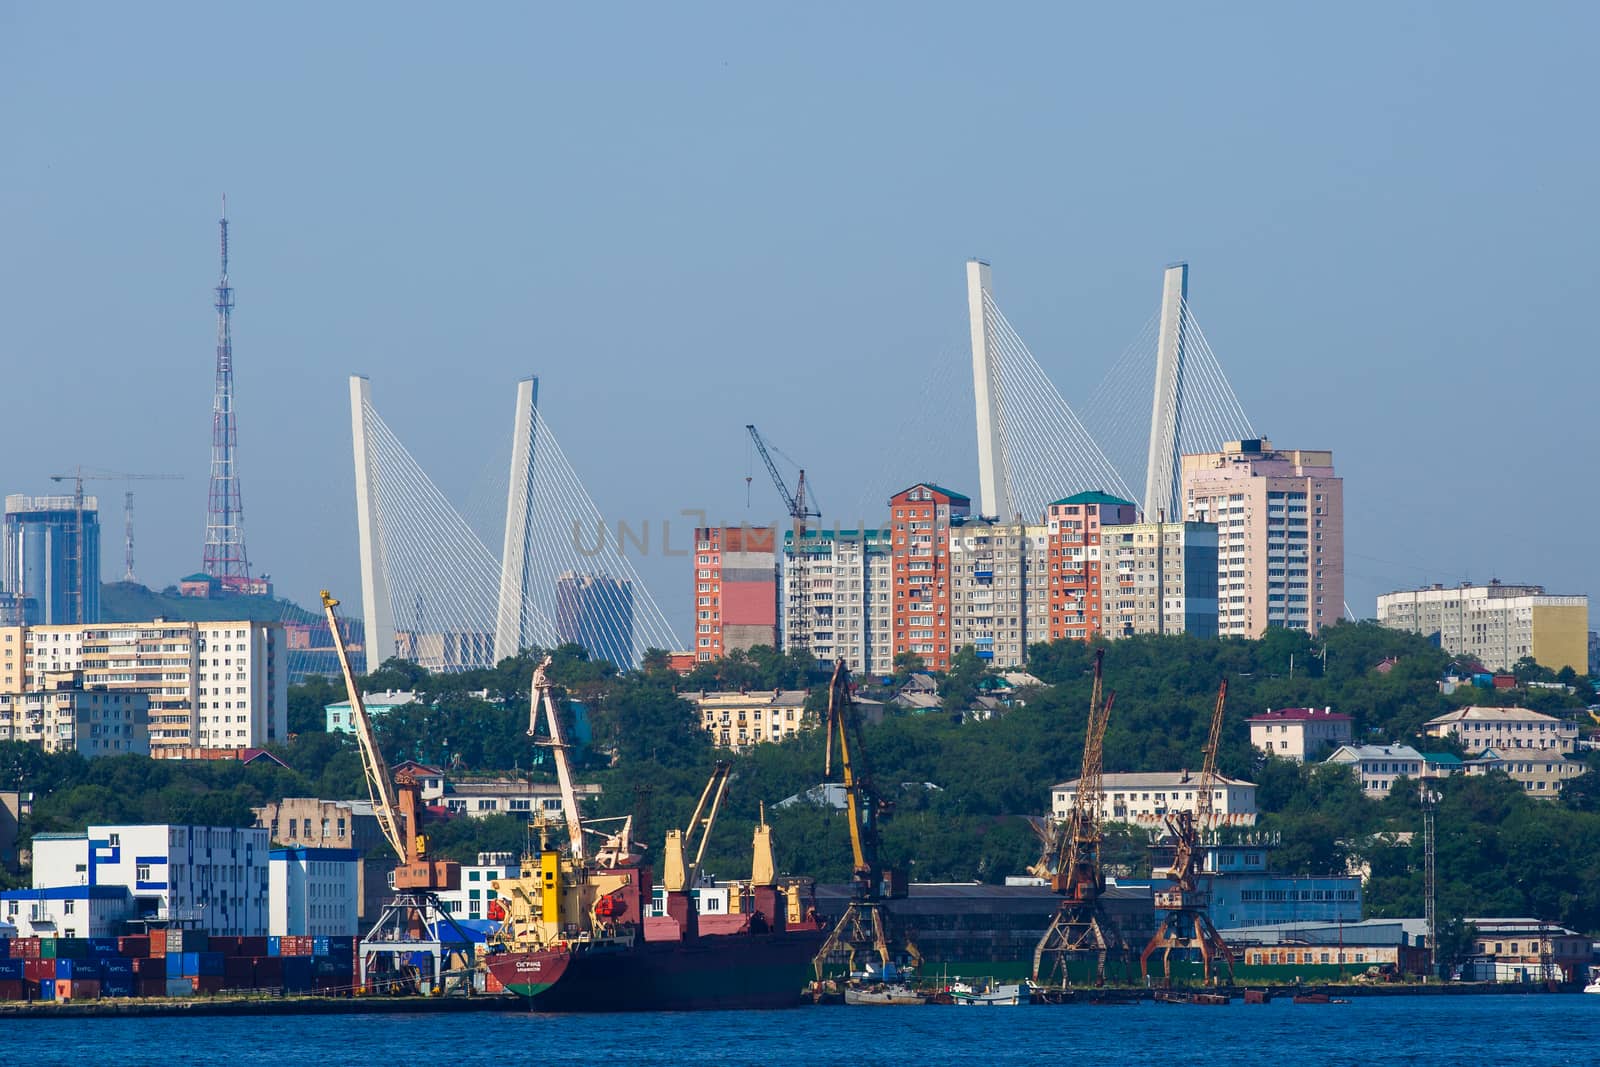 Vladivostok Marine Facade. Commercial seaport from the sea side.